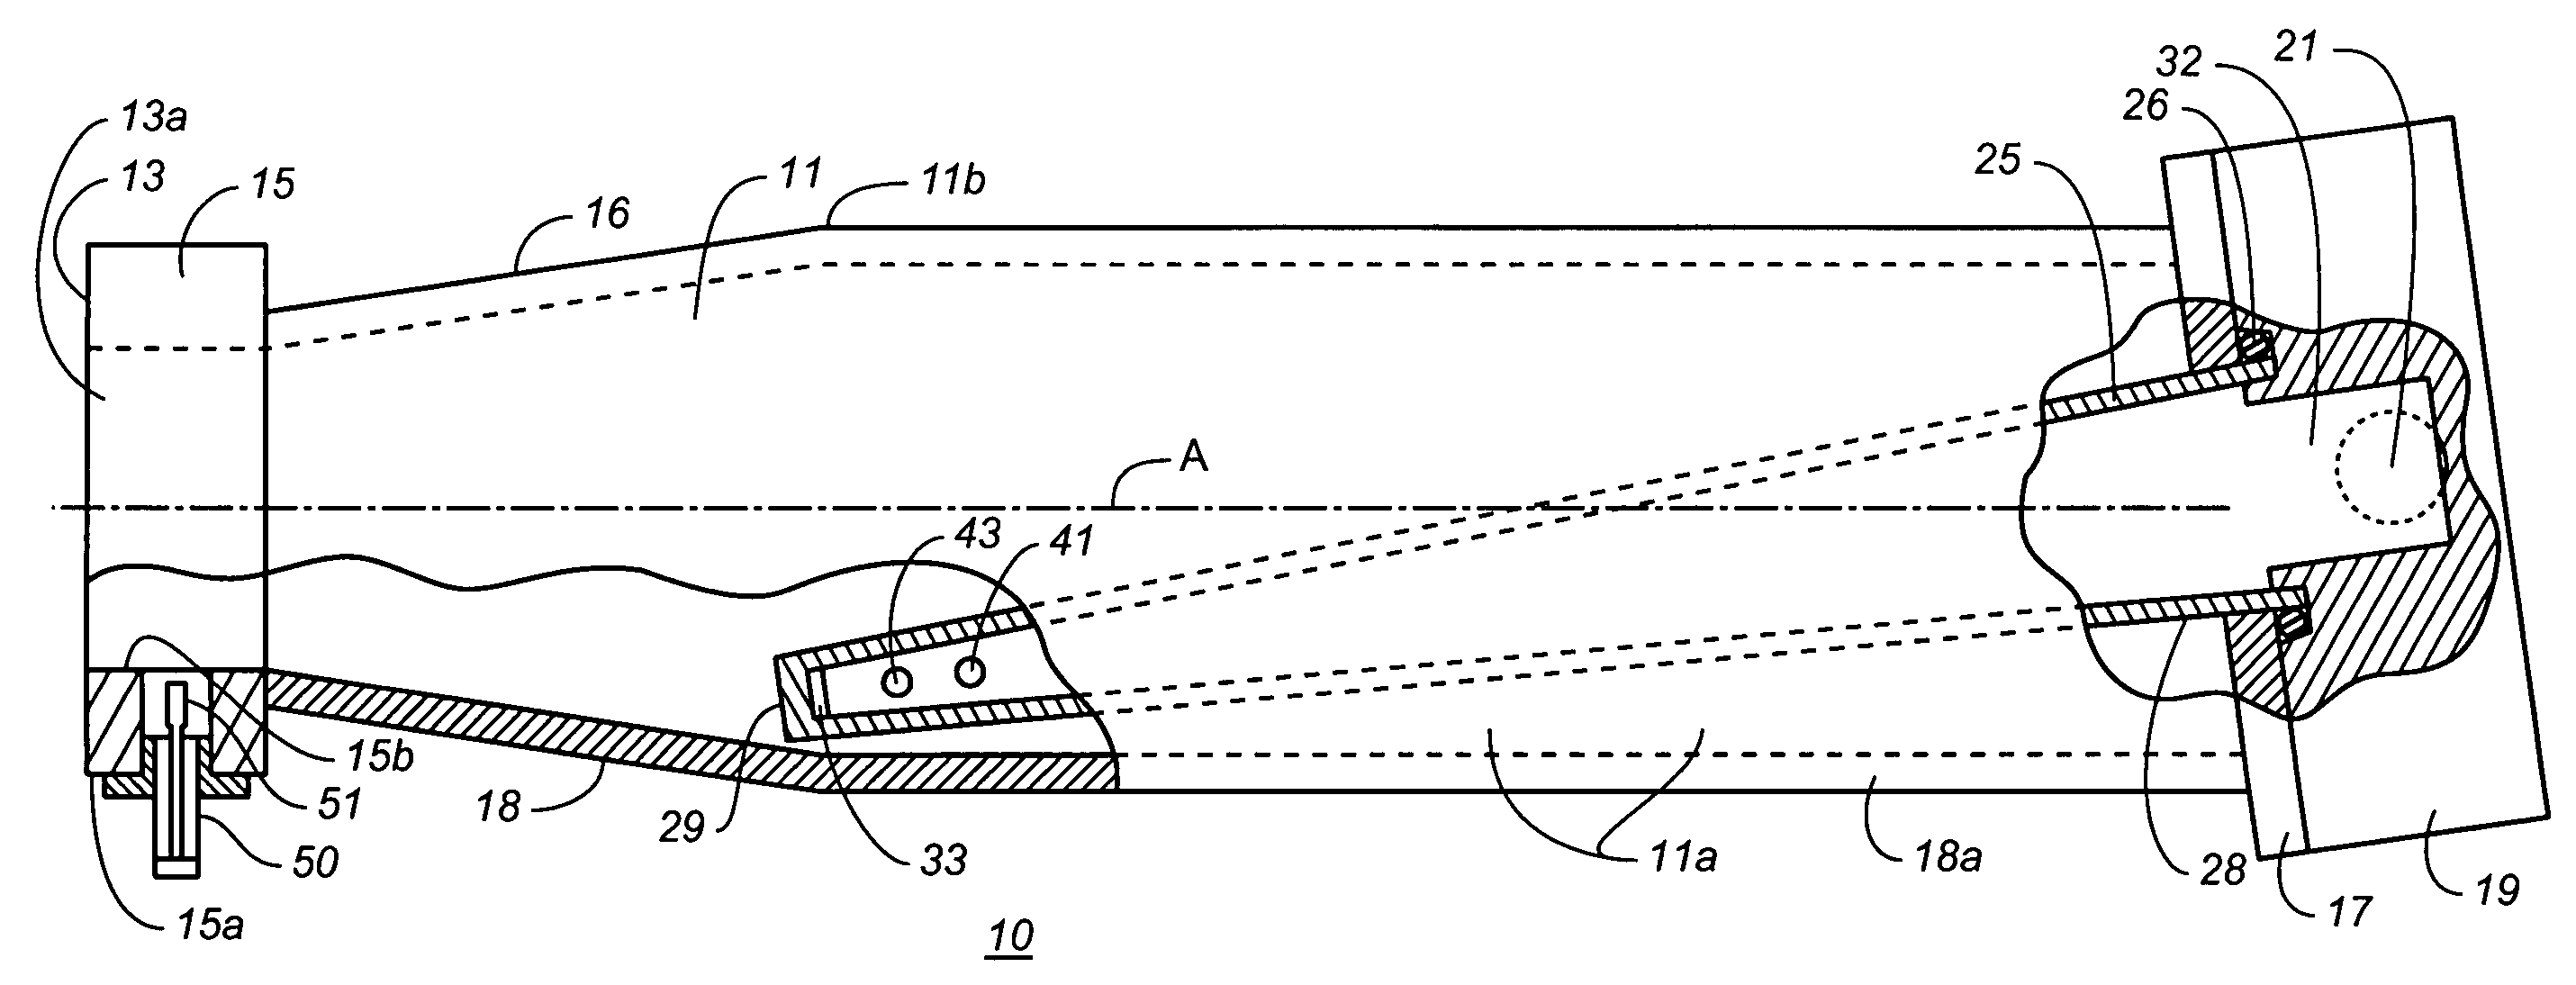 High power absorbing waveguide termination for a microwave transmission line